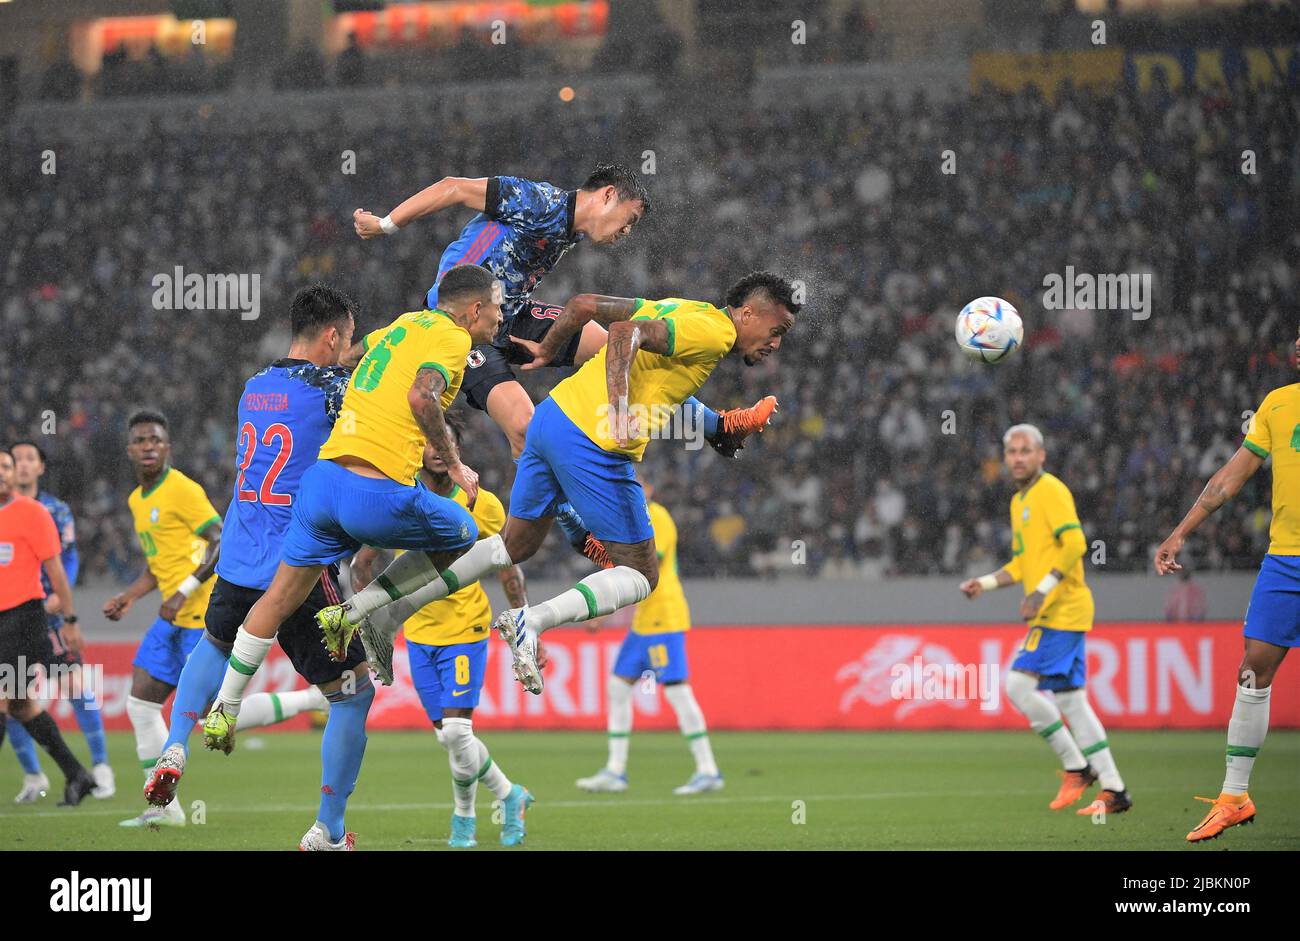 Tokyo, Japan. 6th June, 2022. Wataru Endo (6) of Japan and Eder Militao (2) of Brazil during the Kirin Challenge Cup international friendly soccer match between Japan and Brazil at National Stadium in Tokyo, Japan, June 6, 2022. Credit: FAR EAST PRESS/AFLO/Alamy Live News Stock Photo